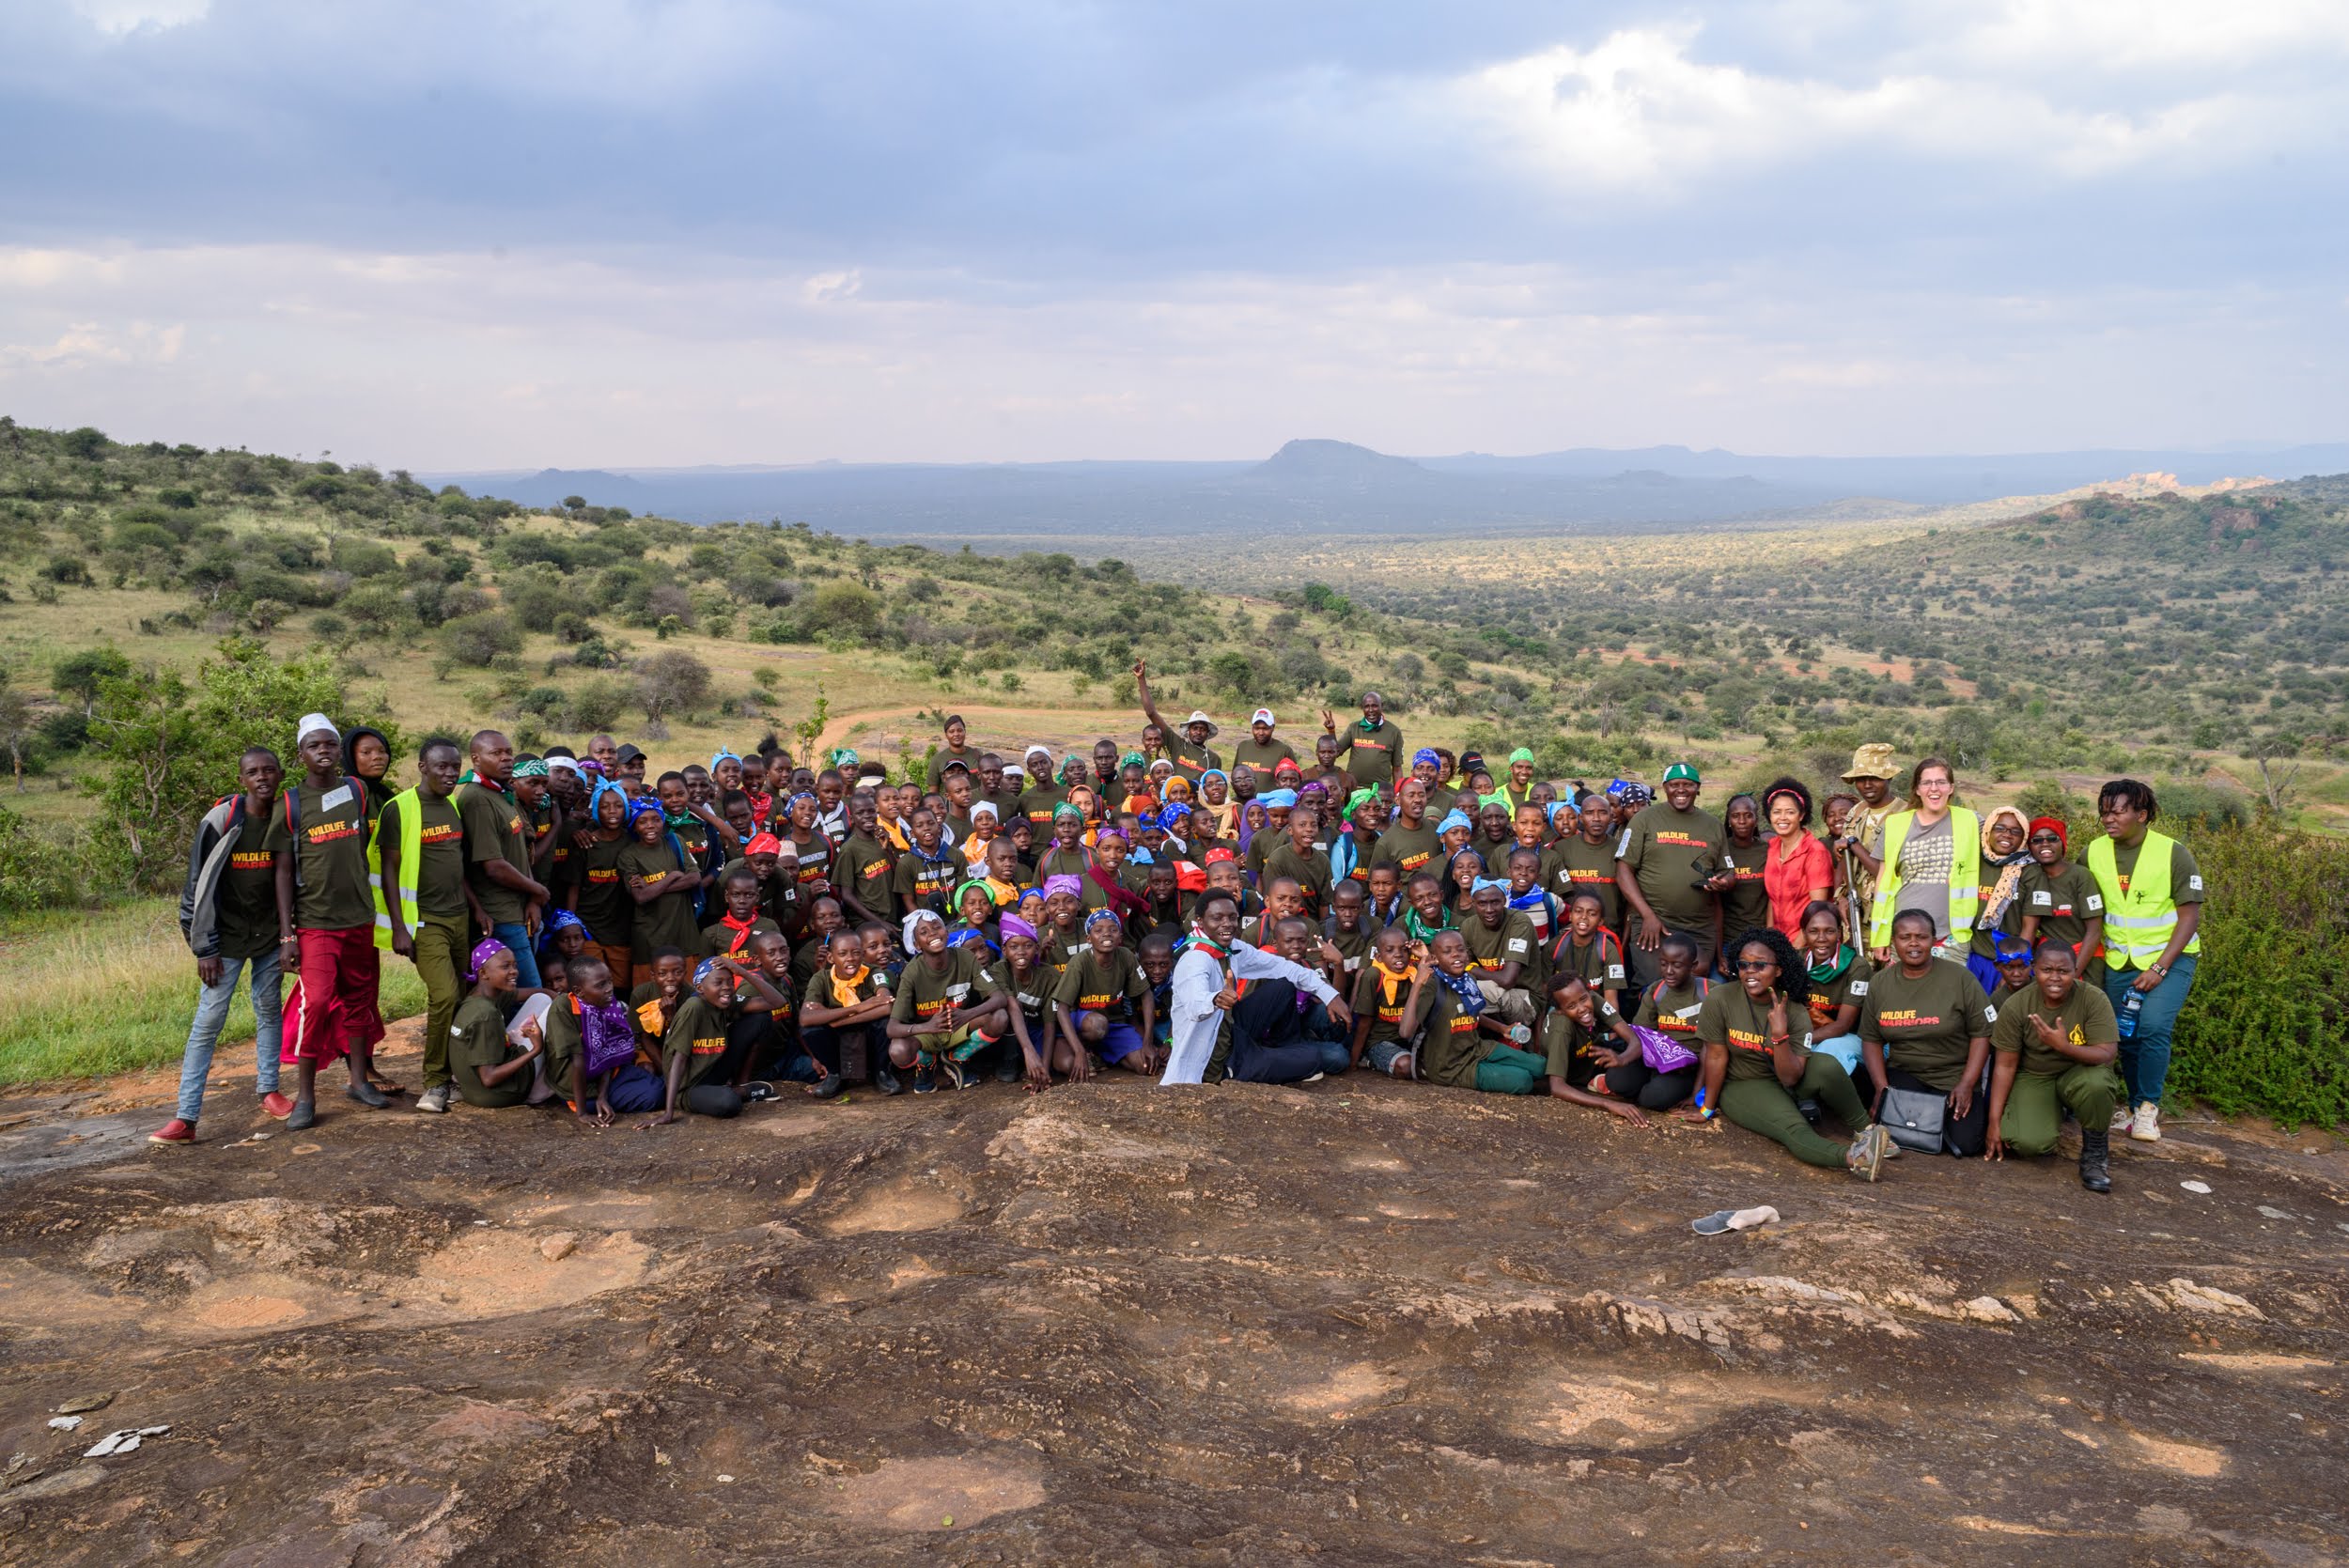 A large group of people posing in front of a Kenyan scrubland landscape.